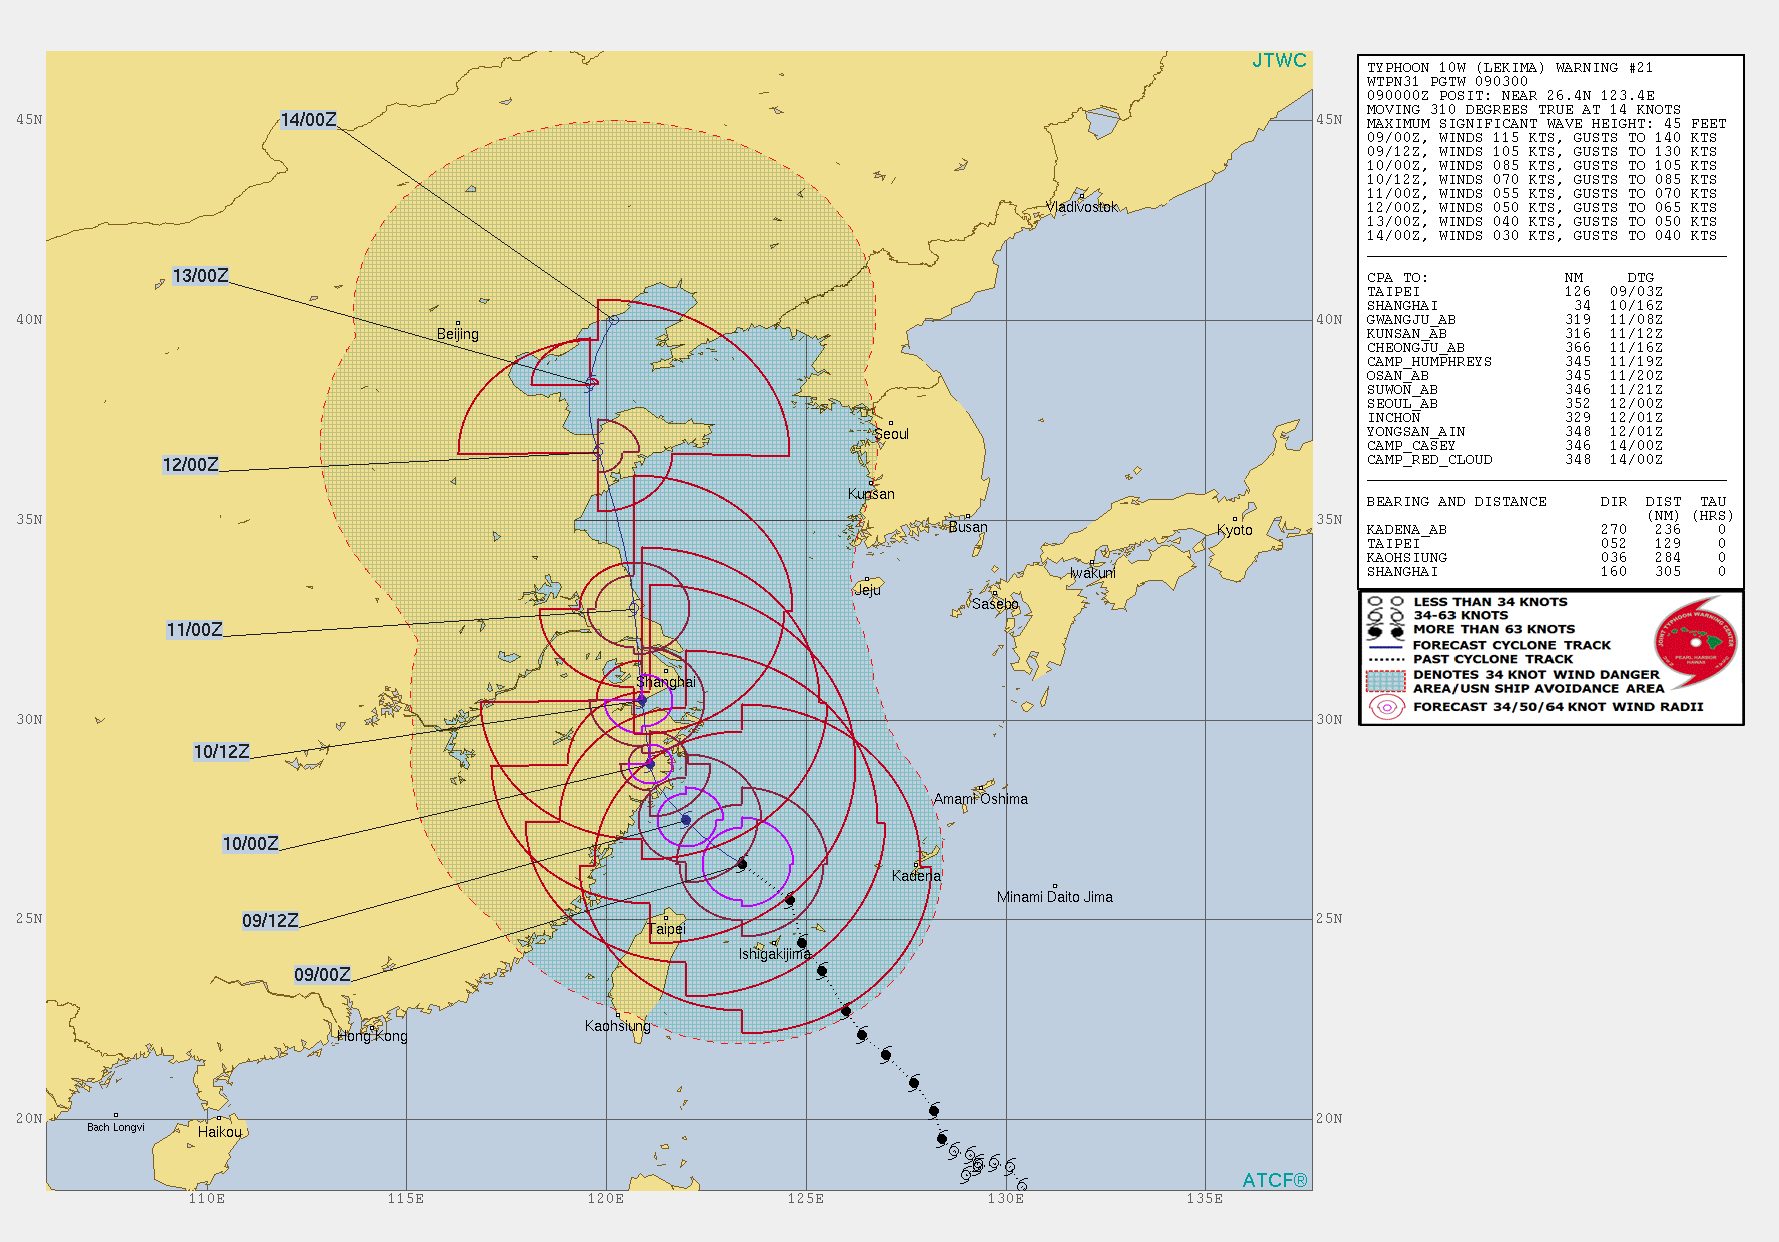 10W: WARNING 21. FORECAST TO BE CLOSE TO SHANGHAI IN 36H WITH POSSIBLY STILL TYPHOON WINDS